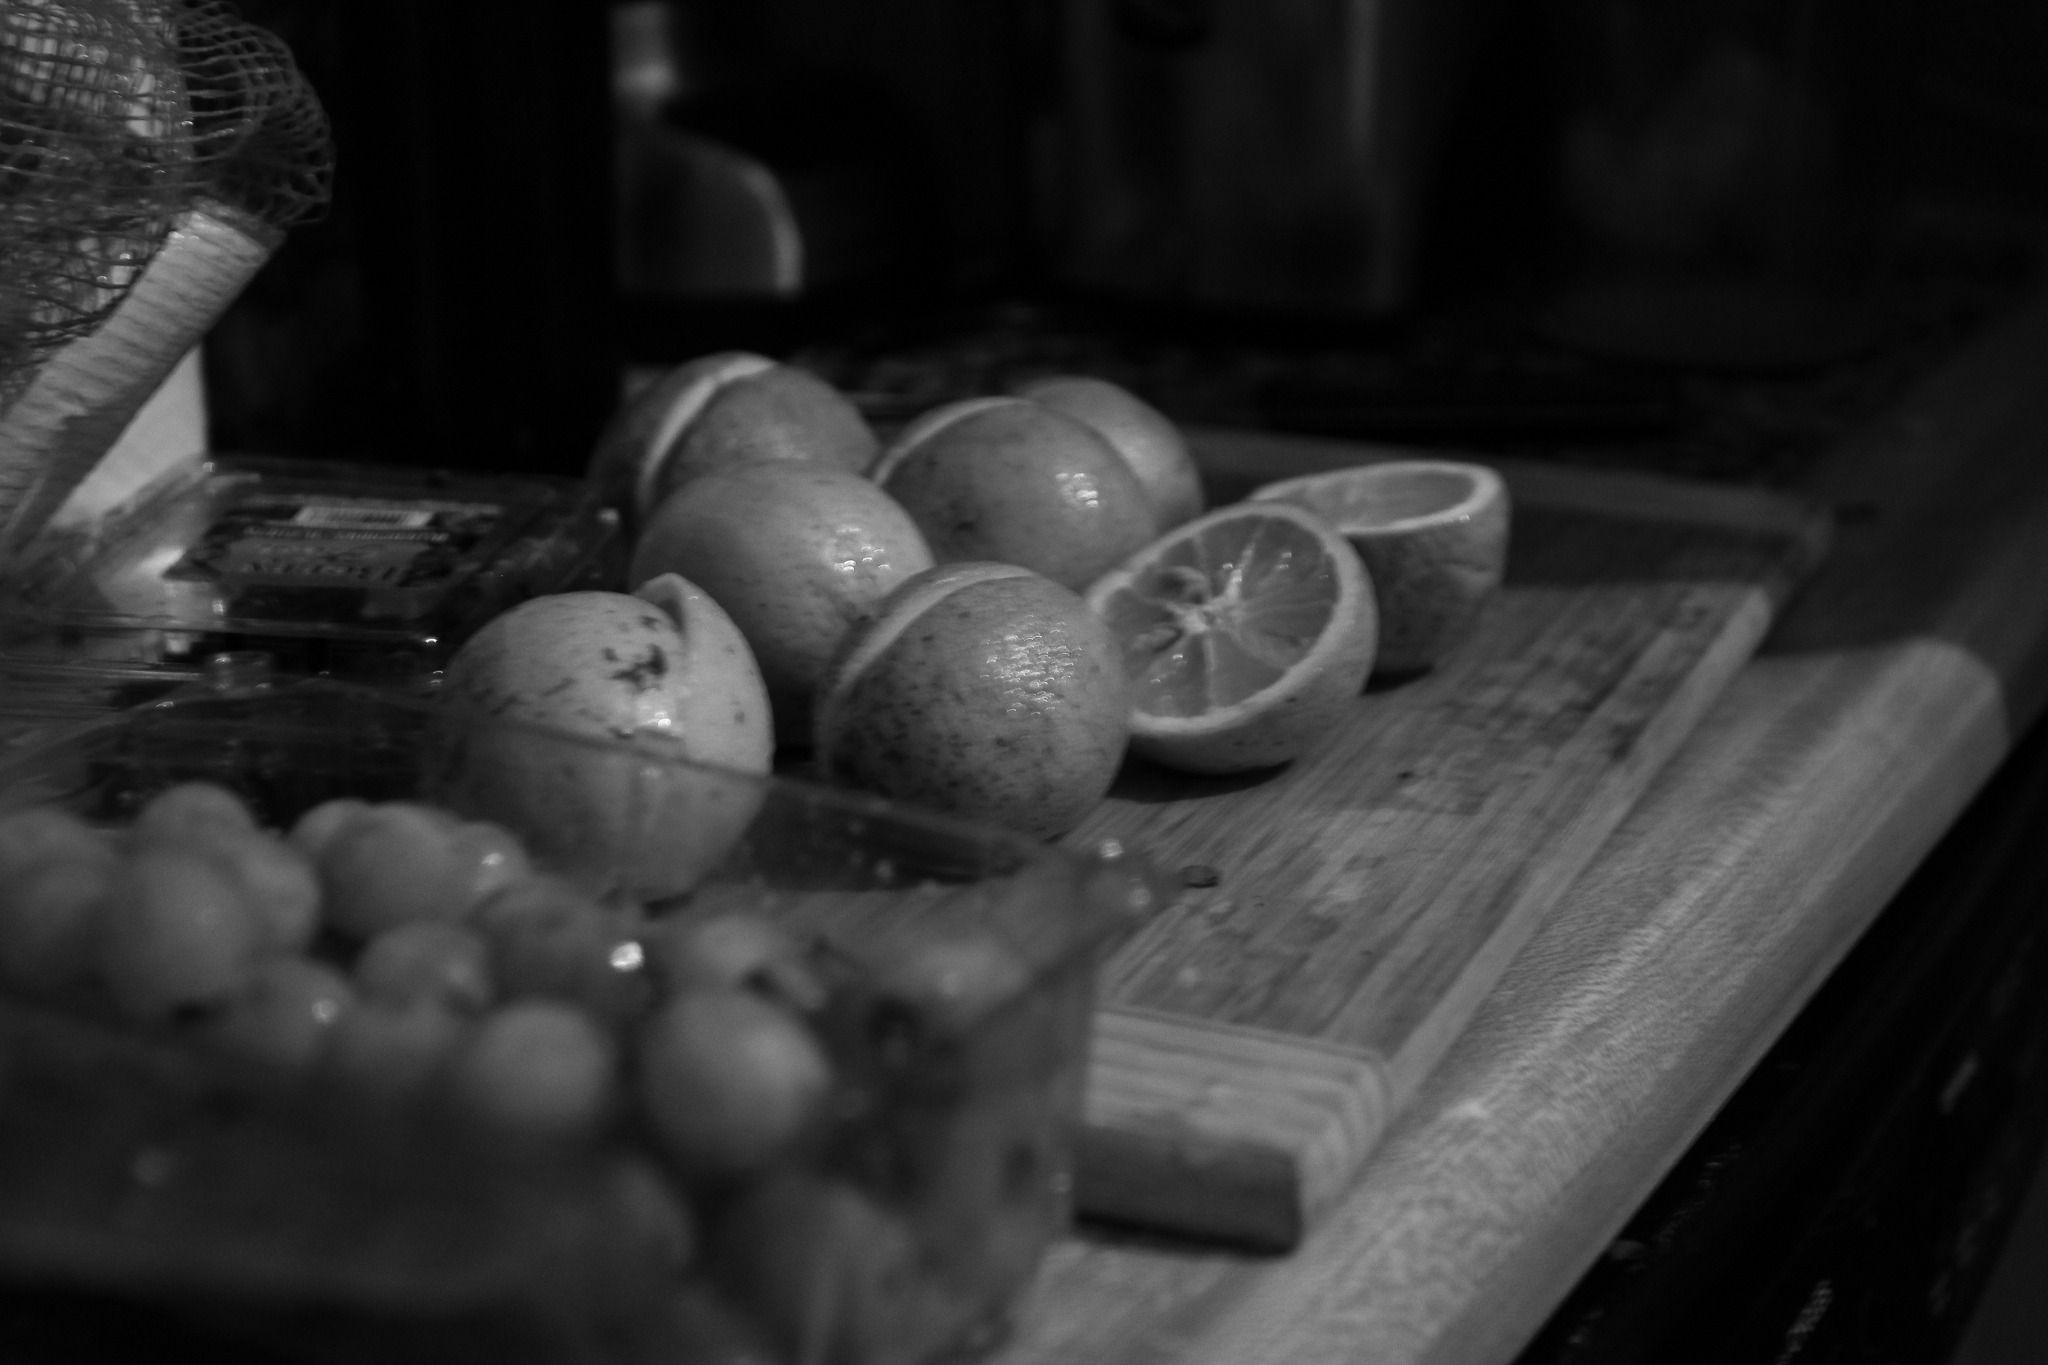 This is a grayscale photo of some lies that are cut in half. In the foreground are some unfocused grapes.